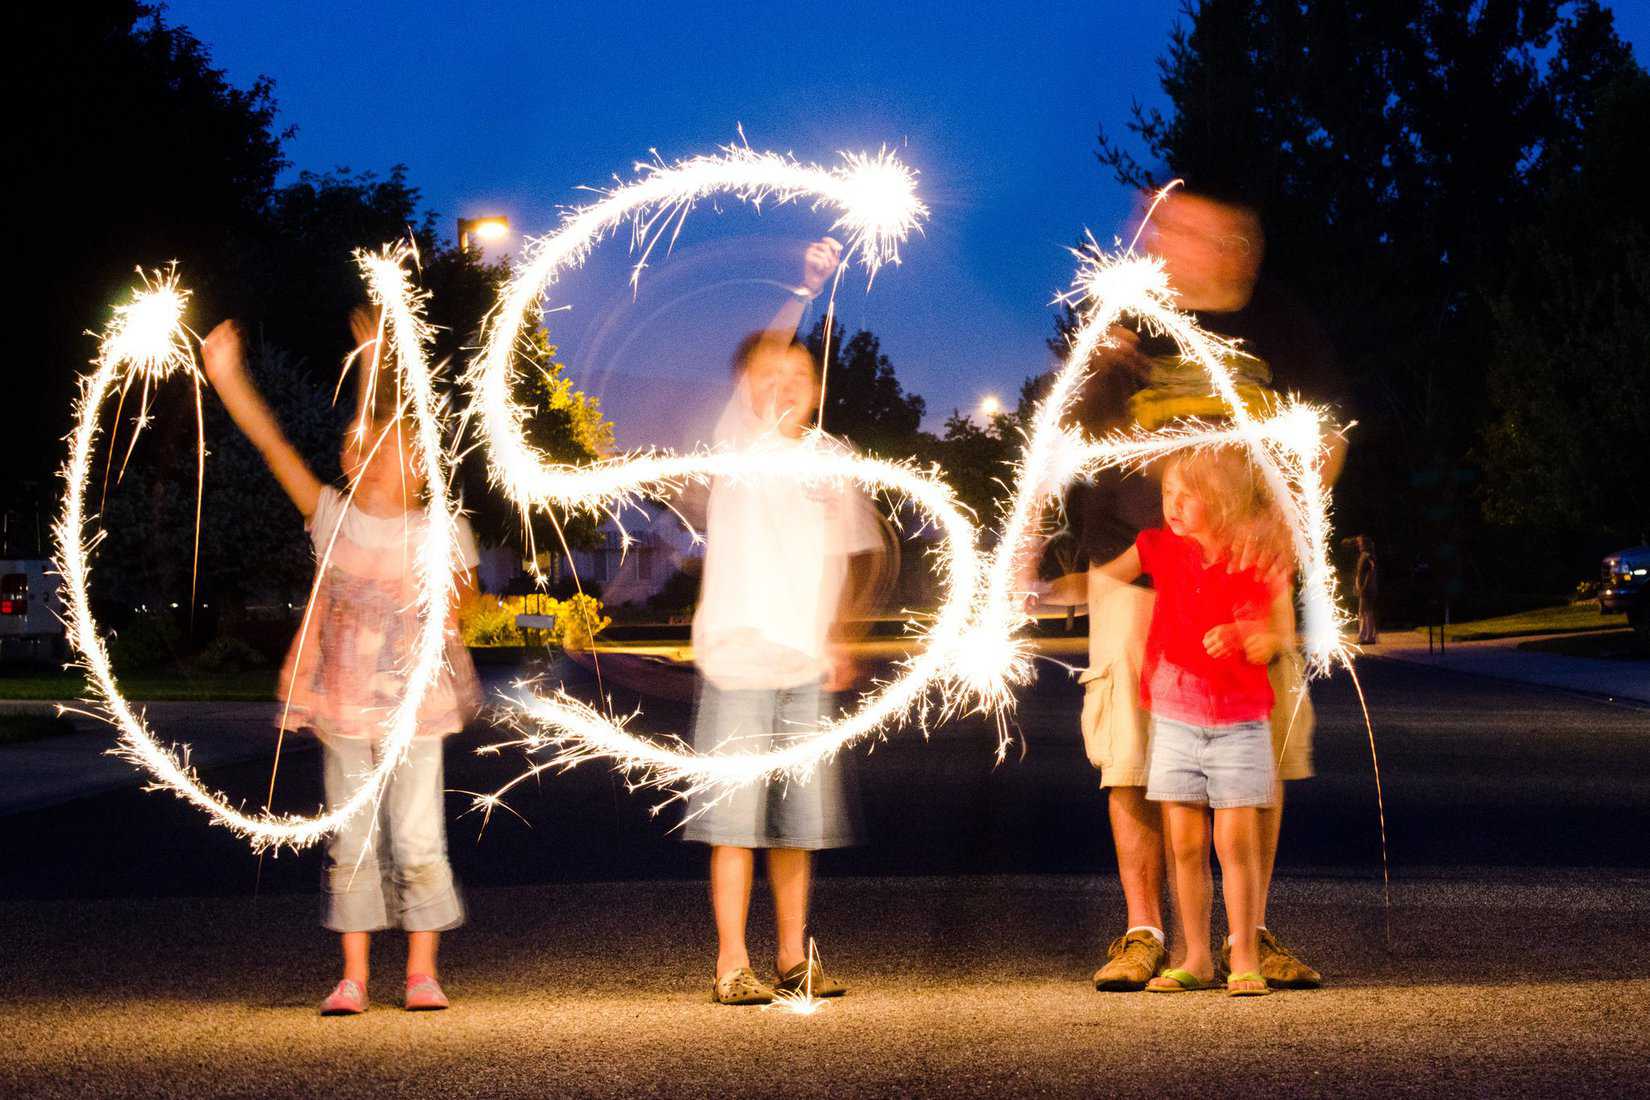 sparklers on the fourth of july